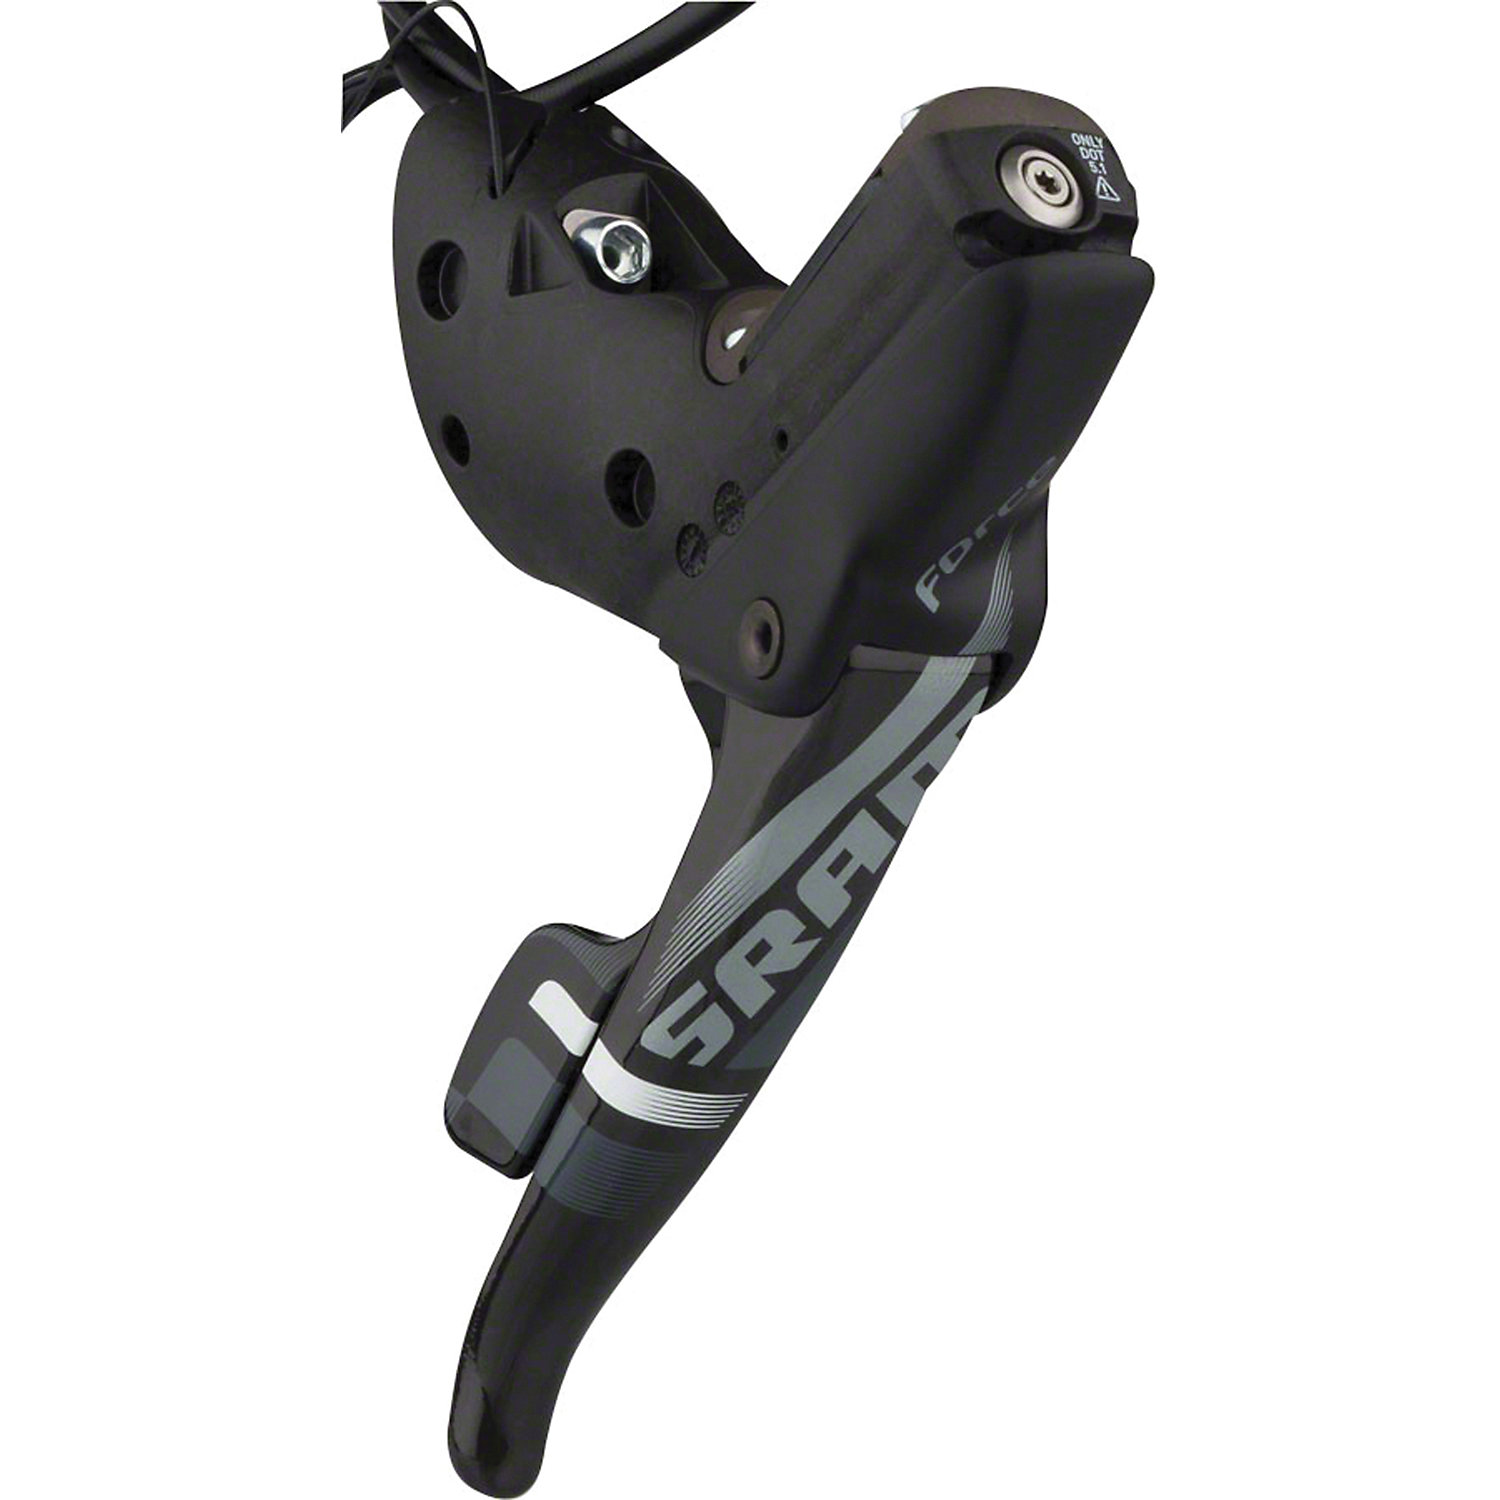 SRAM Force 22 Hydraulic Road Rear DoubleTap Lever Complete with 2000mm Hose and Fittings